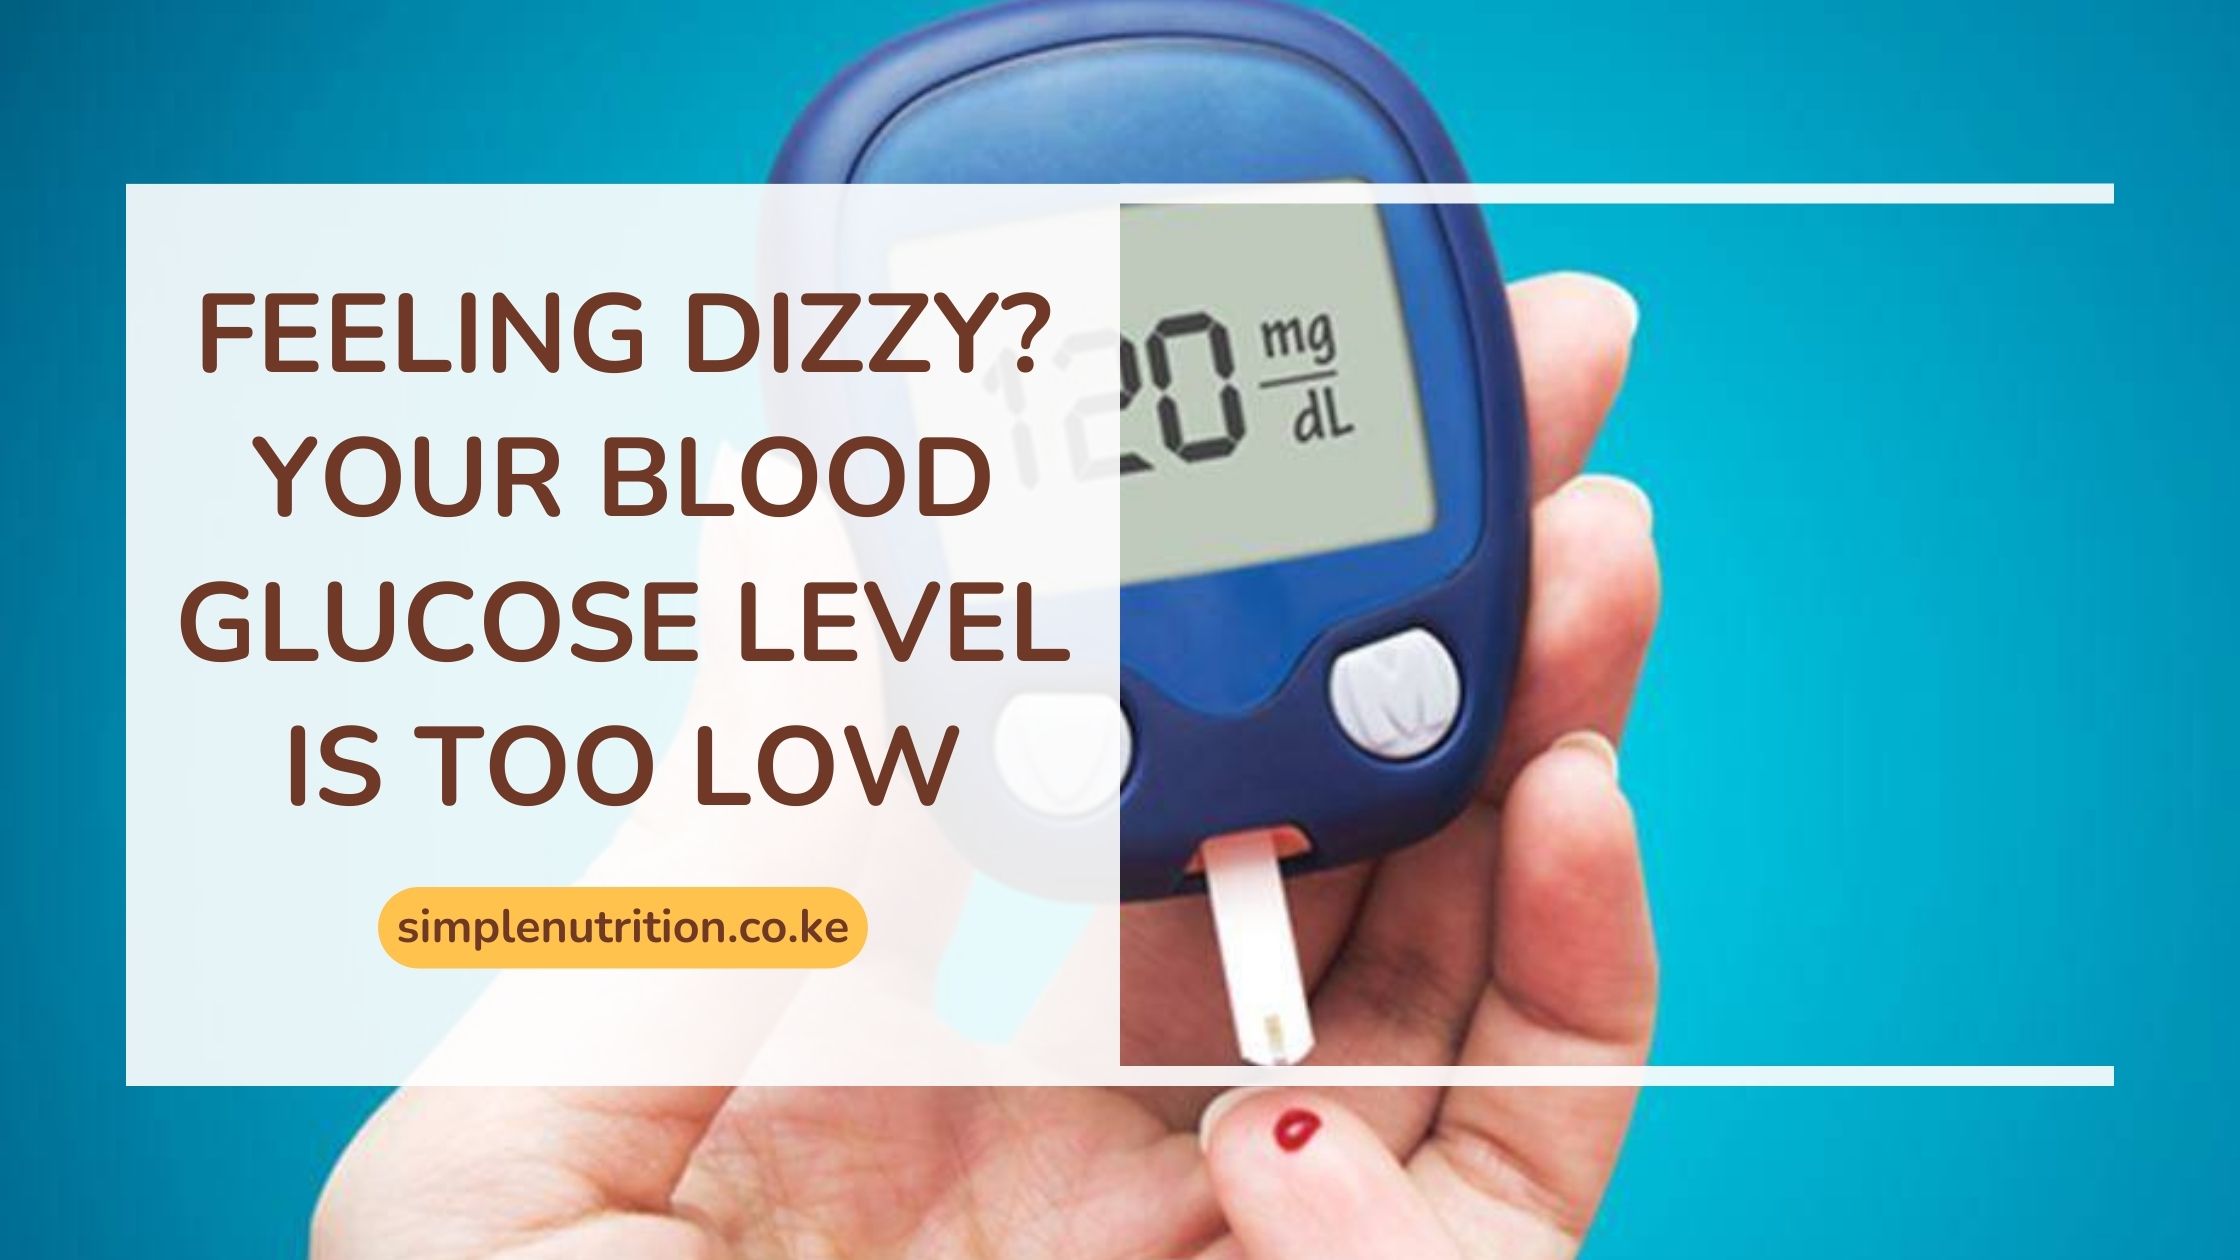 Signs That Your Blood Glucose Level is Too Low